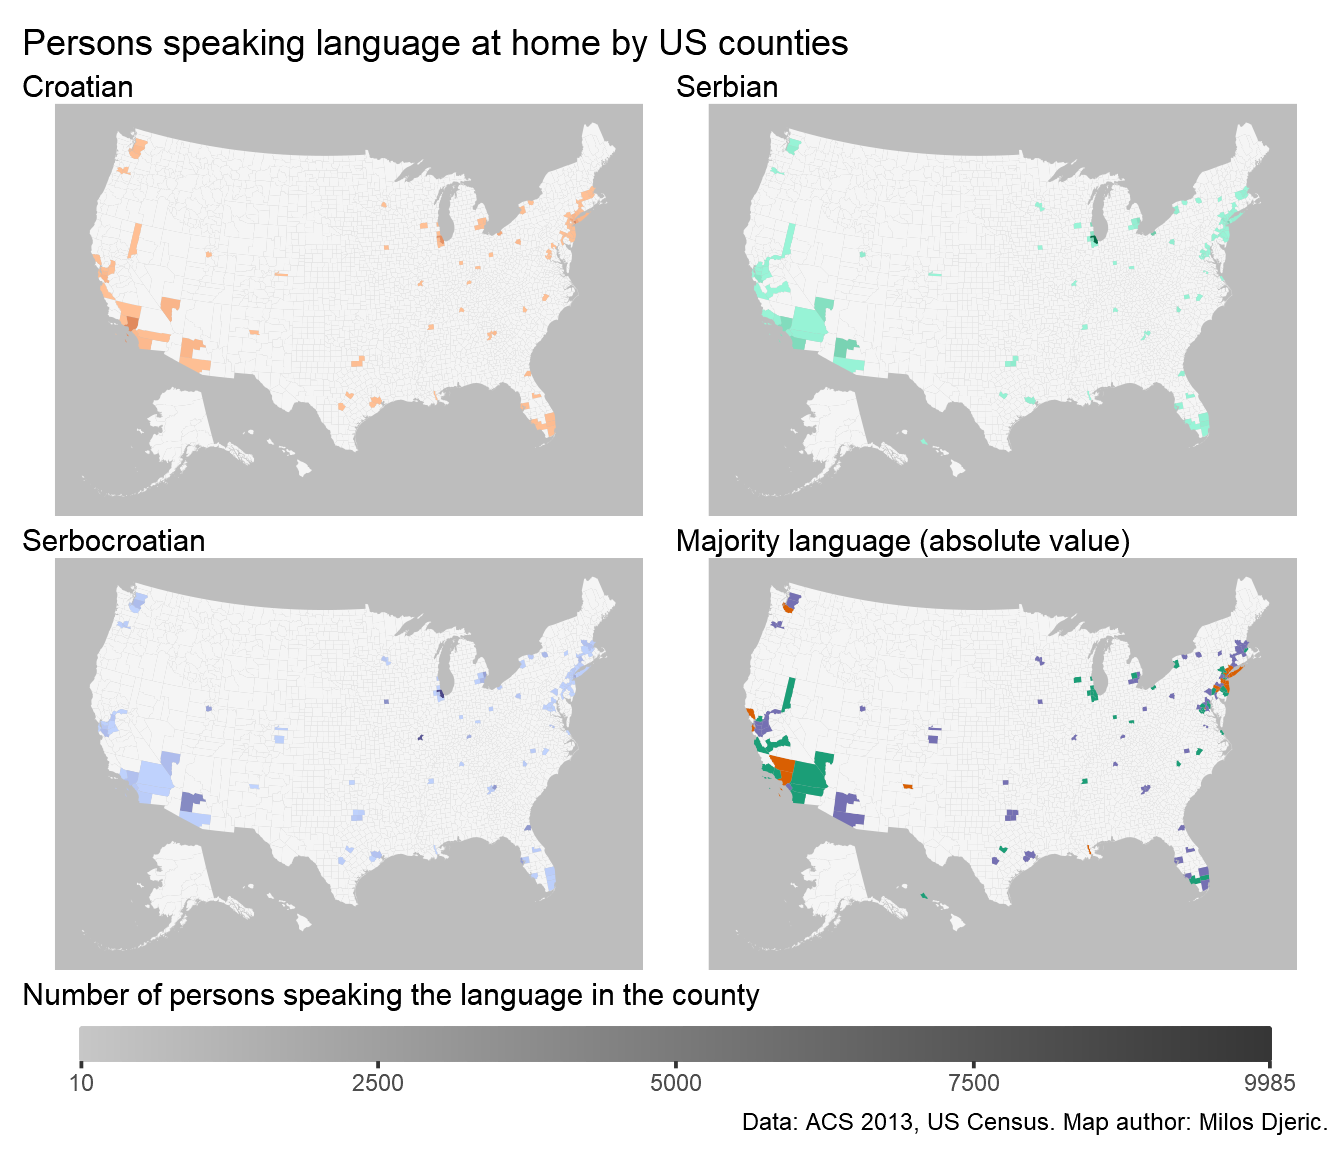 Three maps of the US indicating counties and how many people speak individual languages, with fourth map indicating majority language. Persons speaking langauges are concentrated in the North East and industrial Mid-West, as well as california and Arizona.